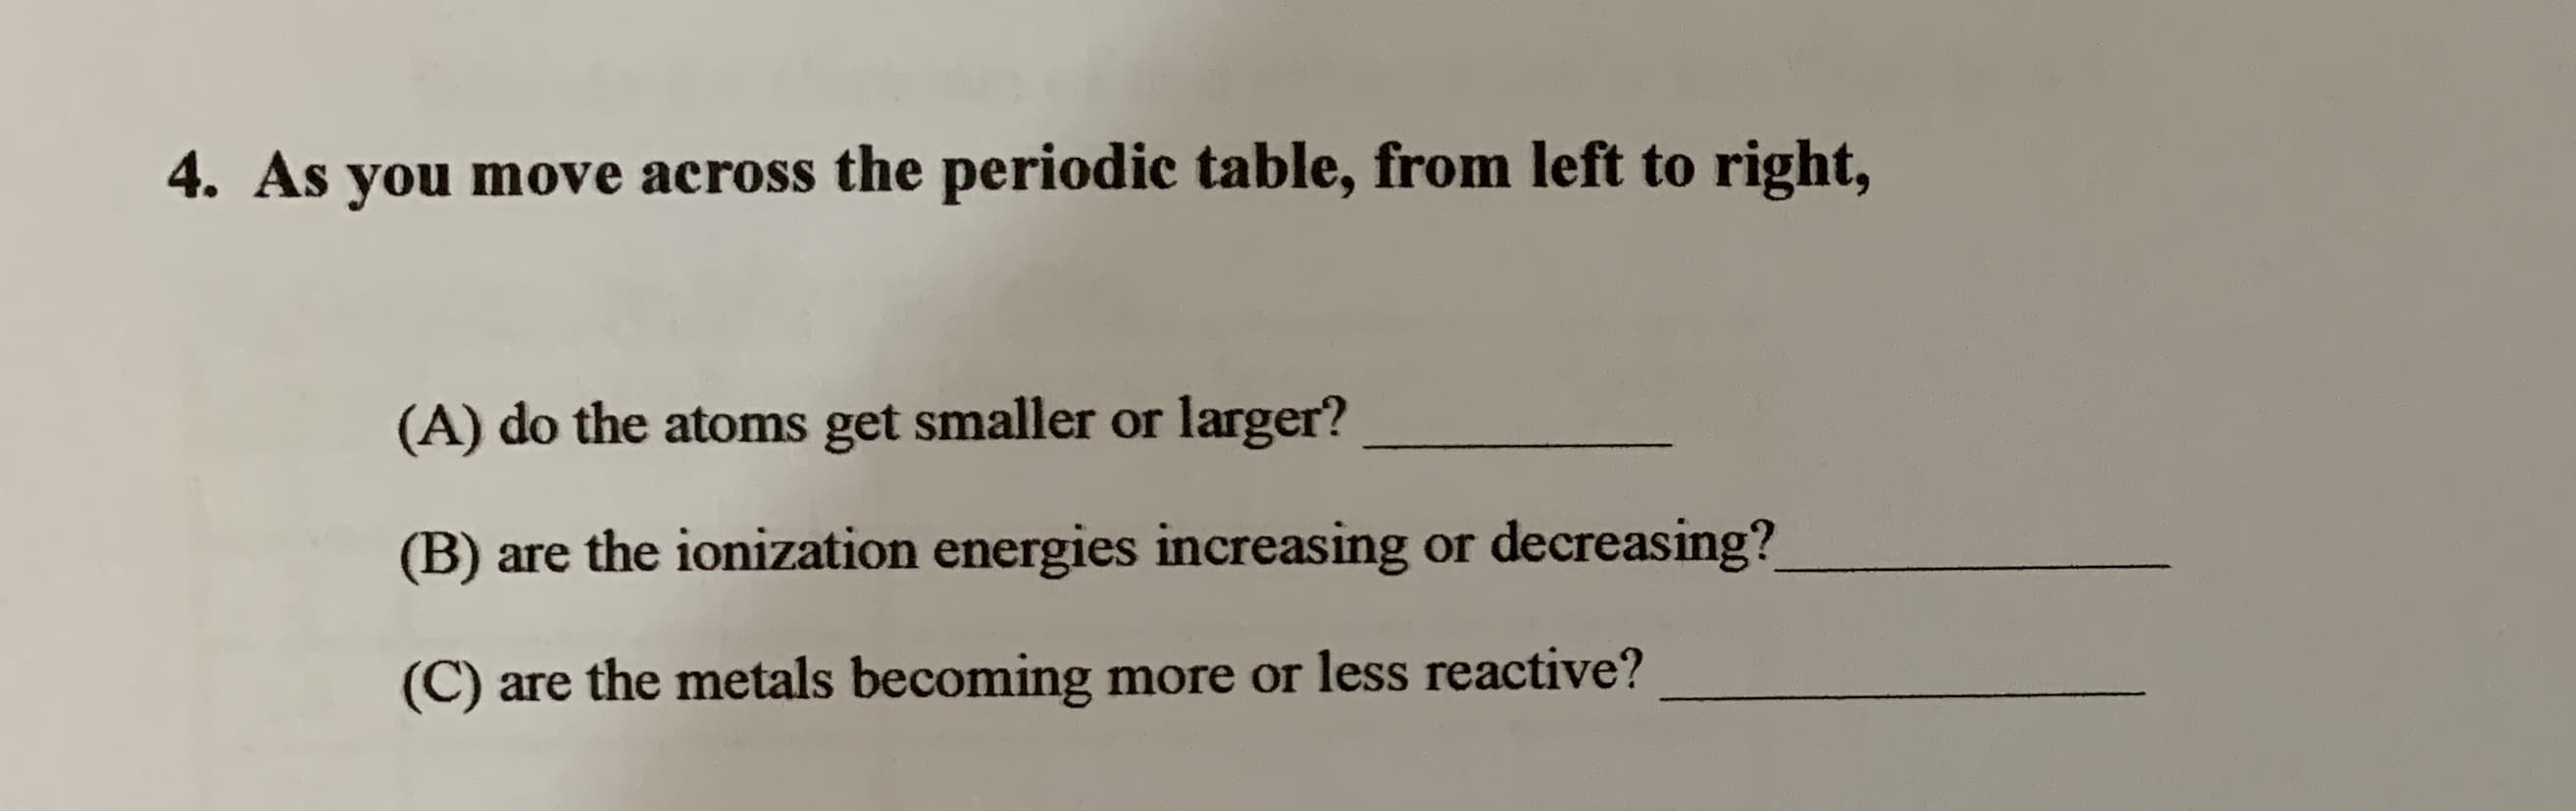 4. As you move across the periodic table, from left to right,
(A) do the atoms get smaller or larger?
(B) are the ionization energies increasing or decreasing?
(C) are the metals becoming more or less reactive?
